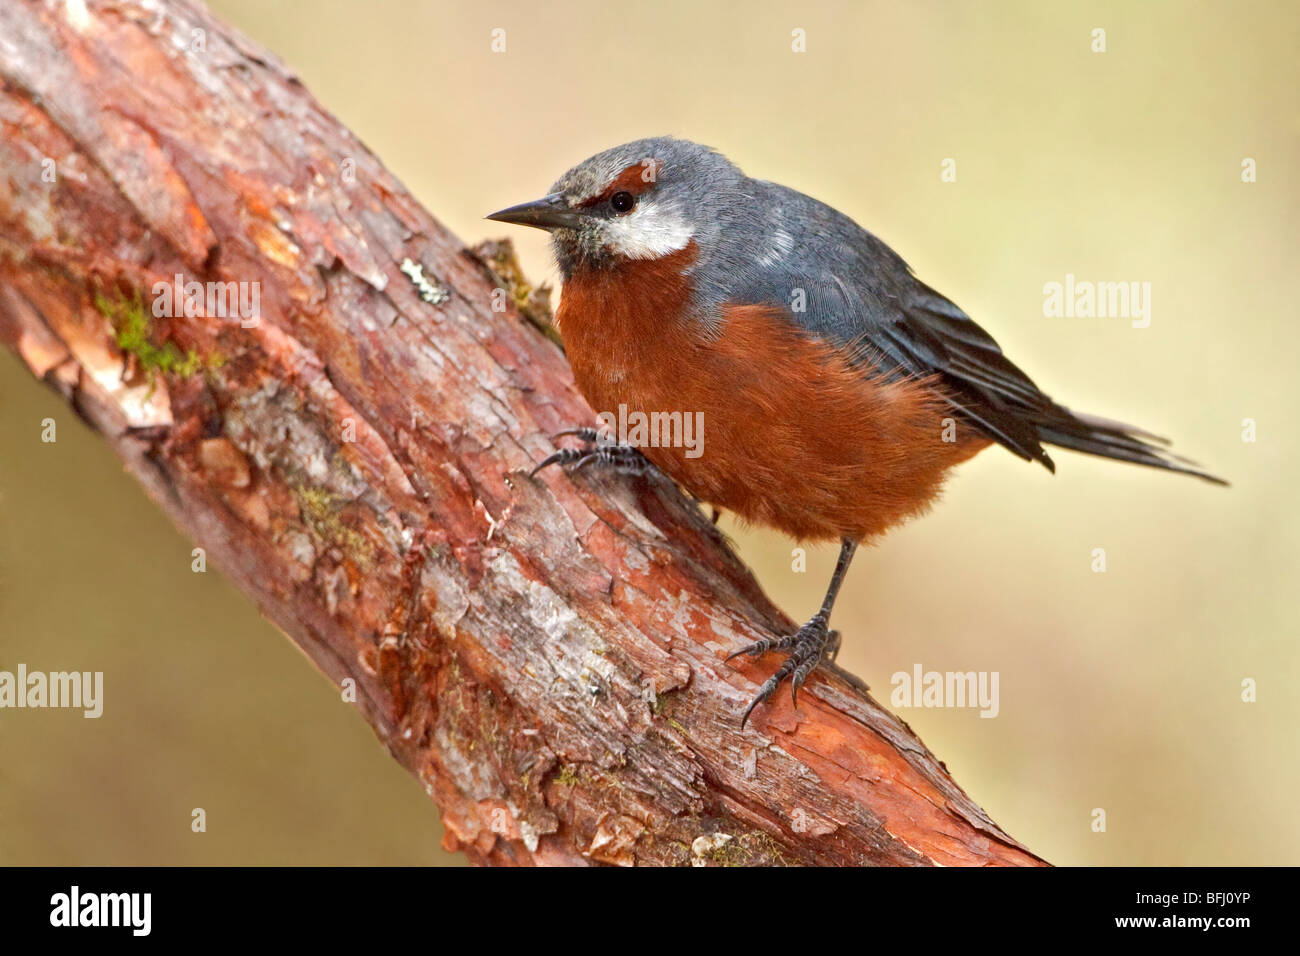 Giant Conebill (Oreomanes fraseri) perched on a branch in a Polylepis forest in Cajas National Park in southern Ecuador. Stock Photo